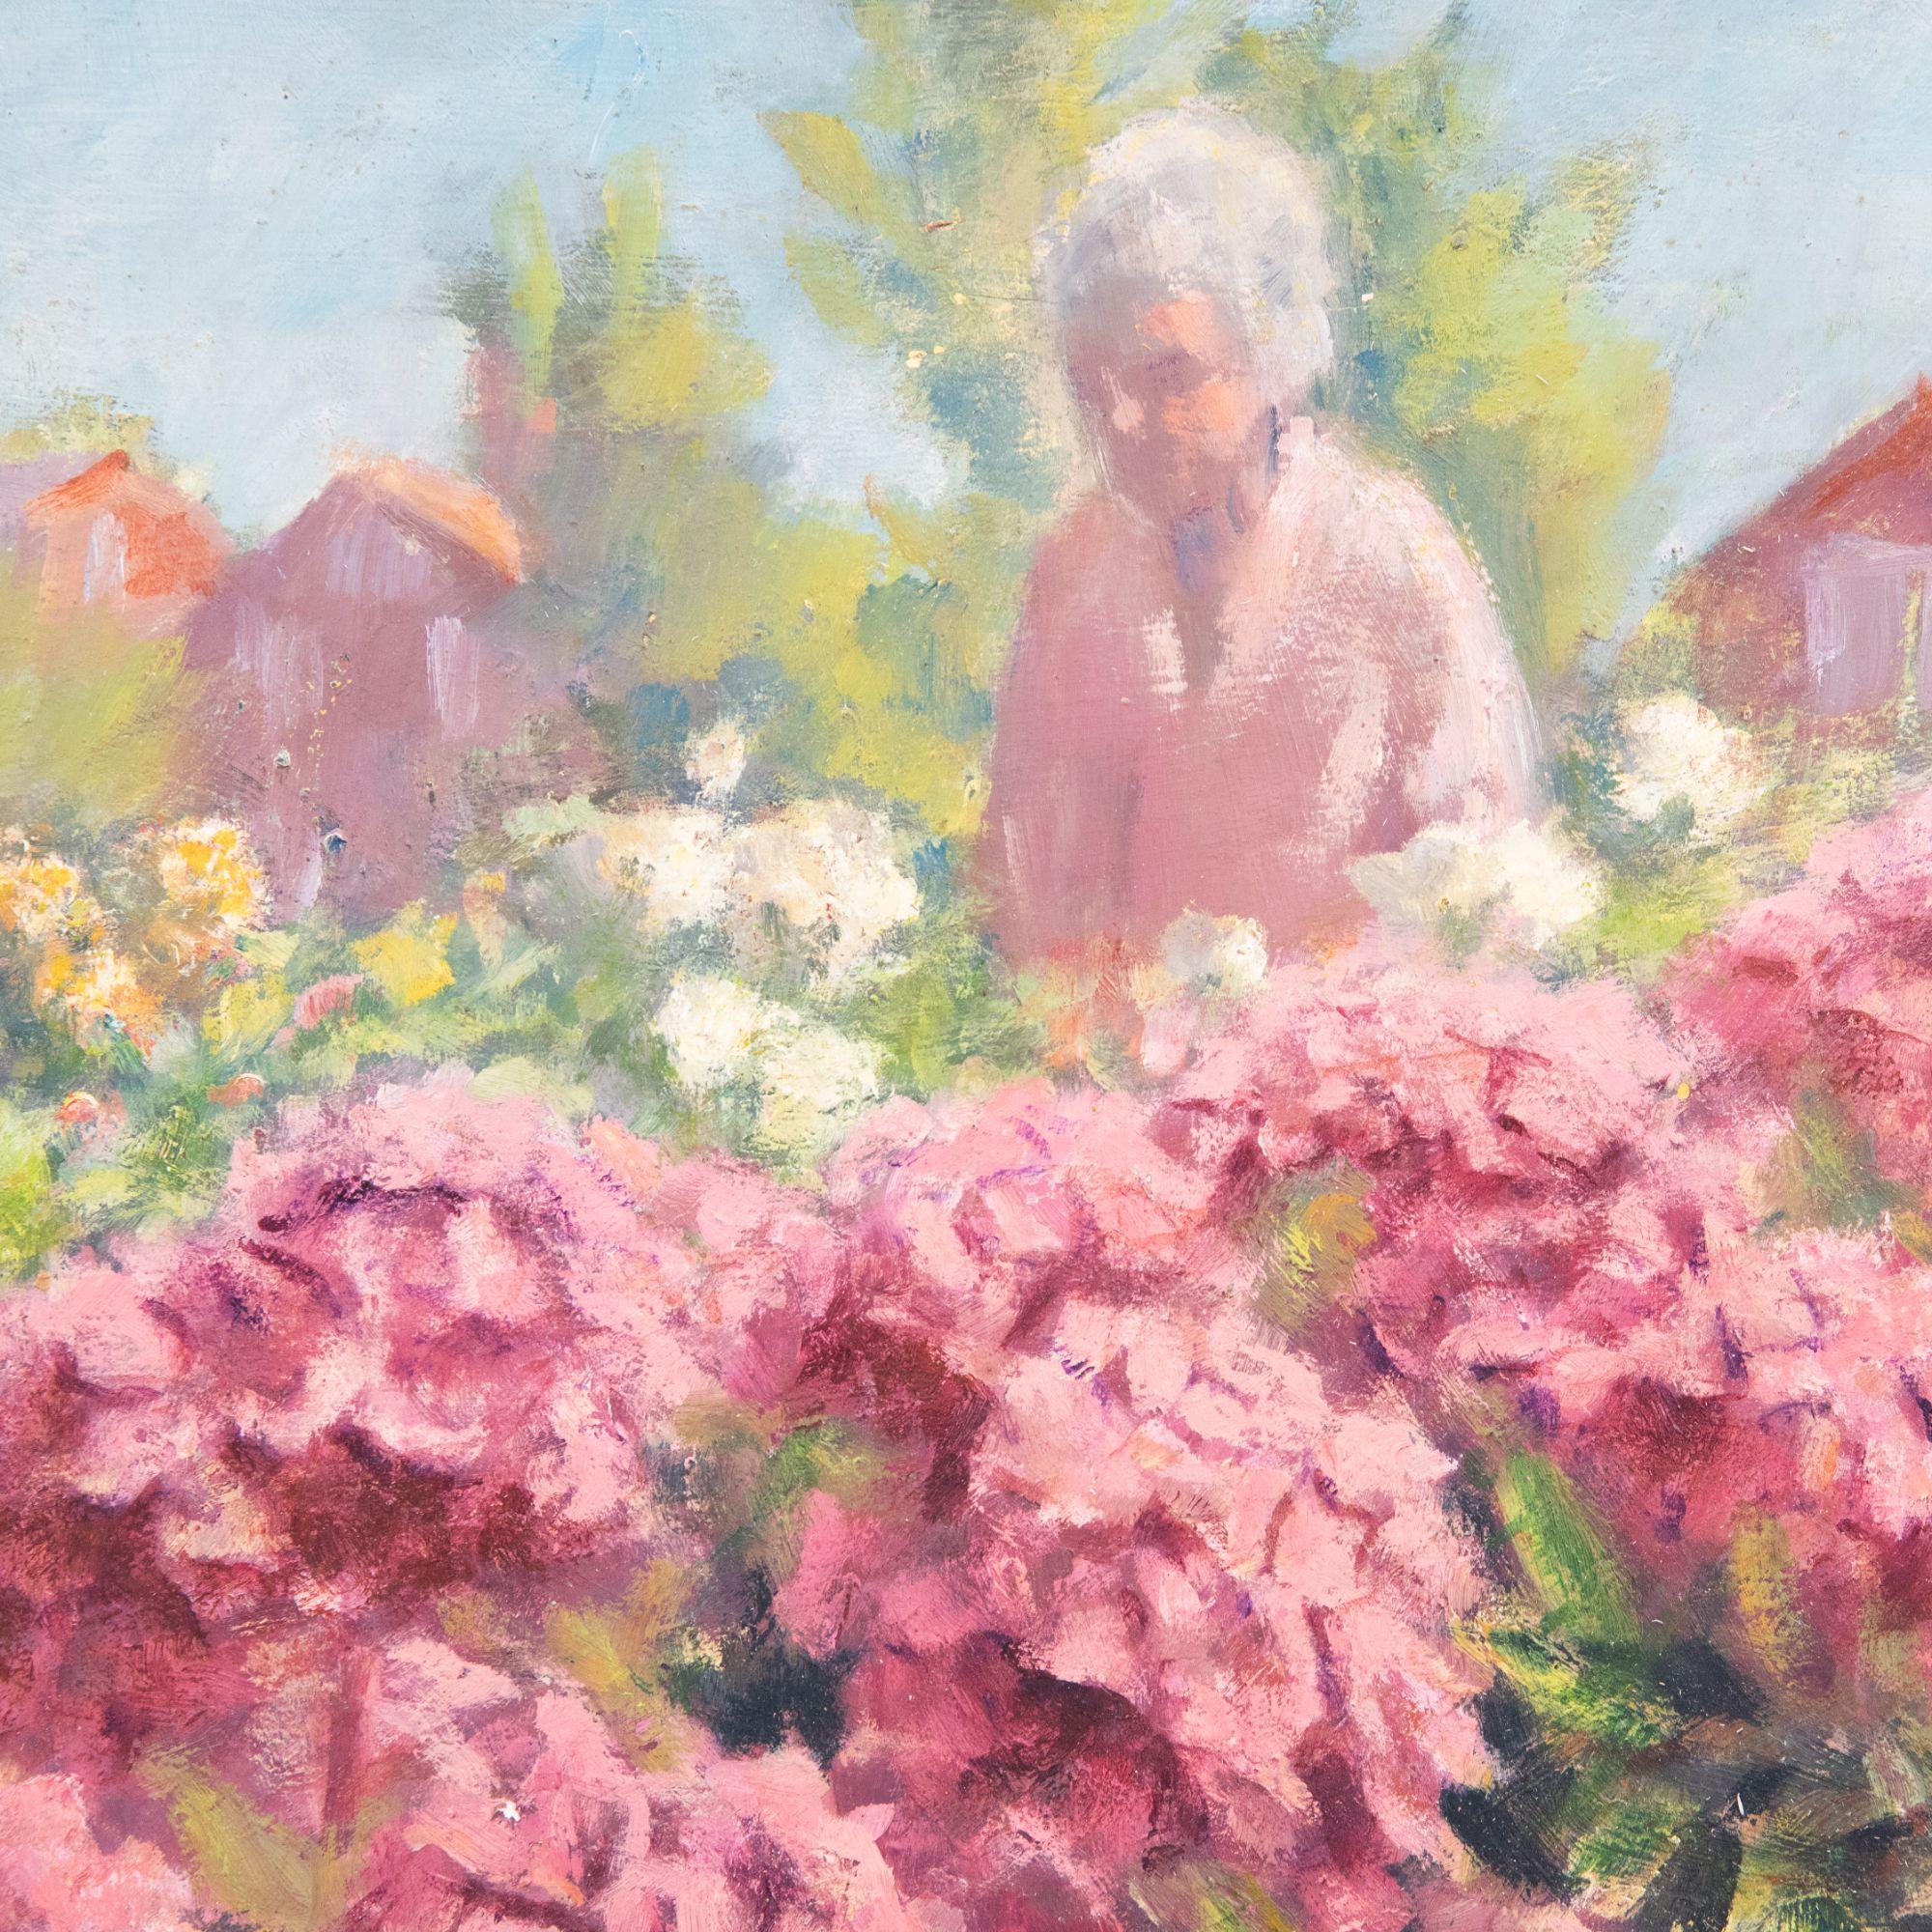 A charming oil study depicting a women strolling through a garden filled with flowers. The blooming hydrangeas in the foreground are captures in expressive brushstrokes of pink which is reflected in the woman's jacket. Unsigned. On board.
